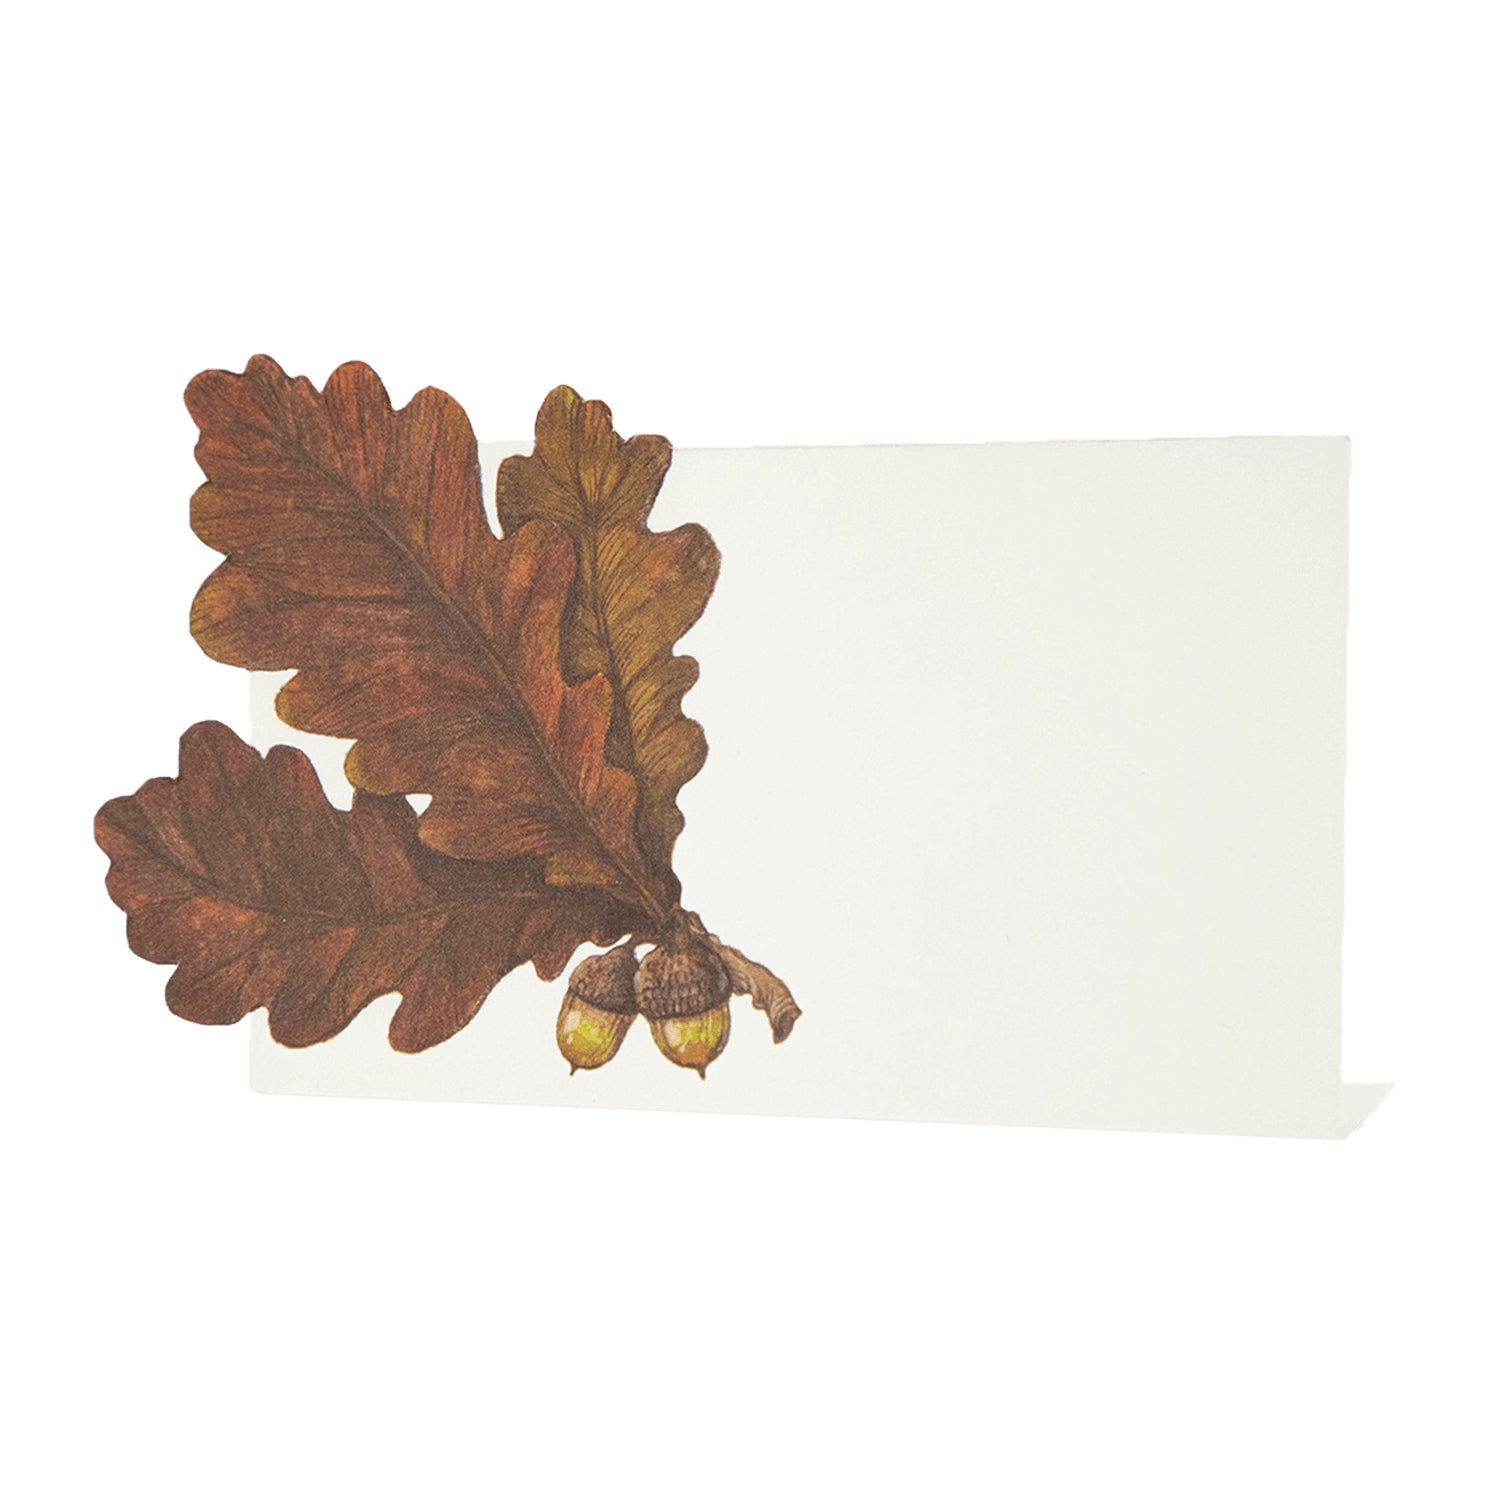 A rectangular, die-cut, free-standing white place card featuring three orange-brown oak leaves and two acorn adorning the left side.